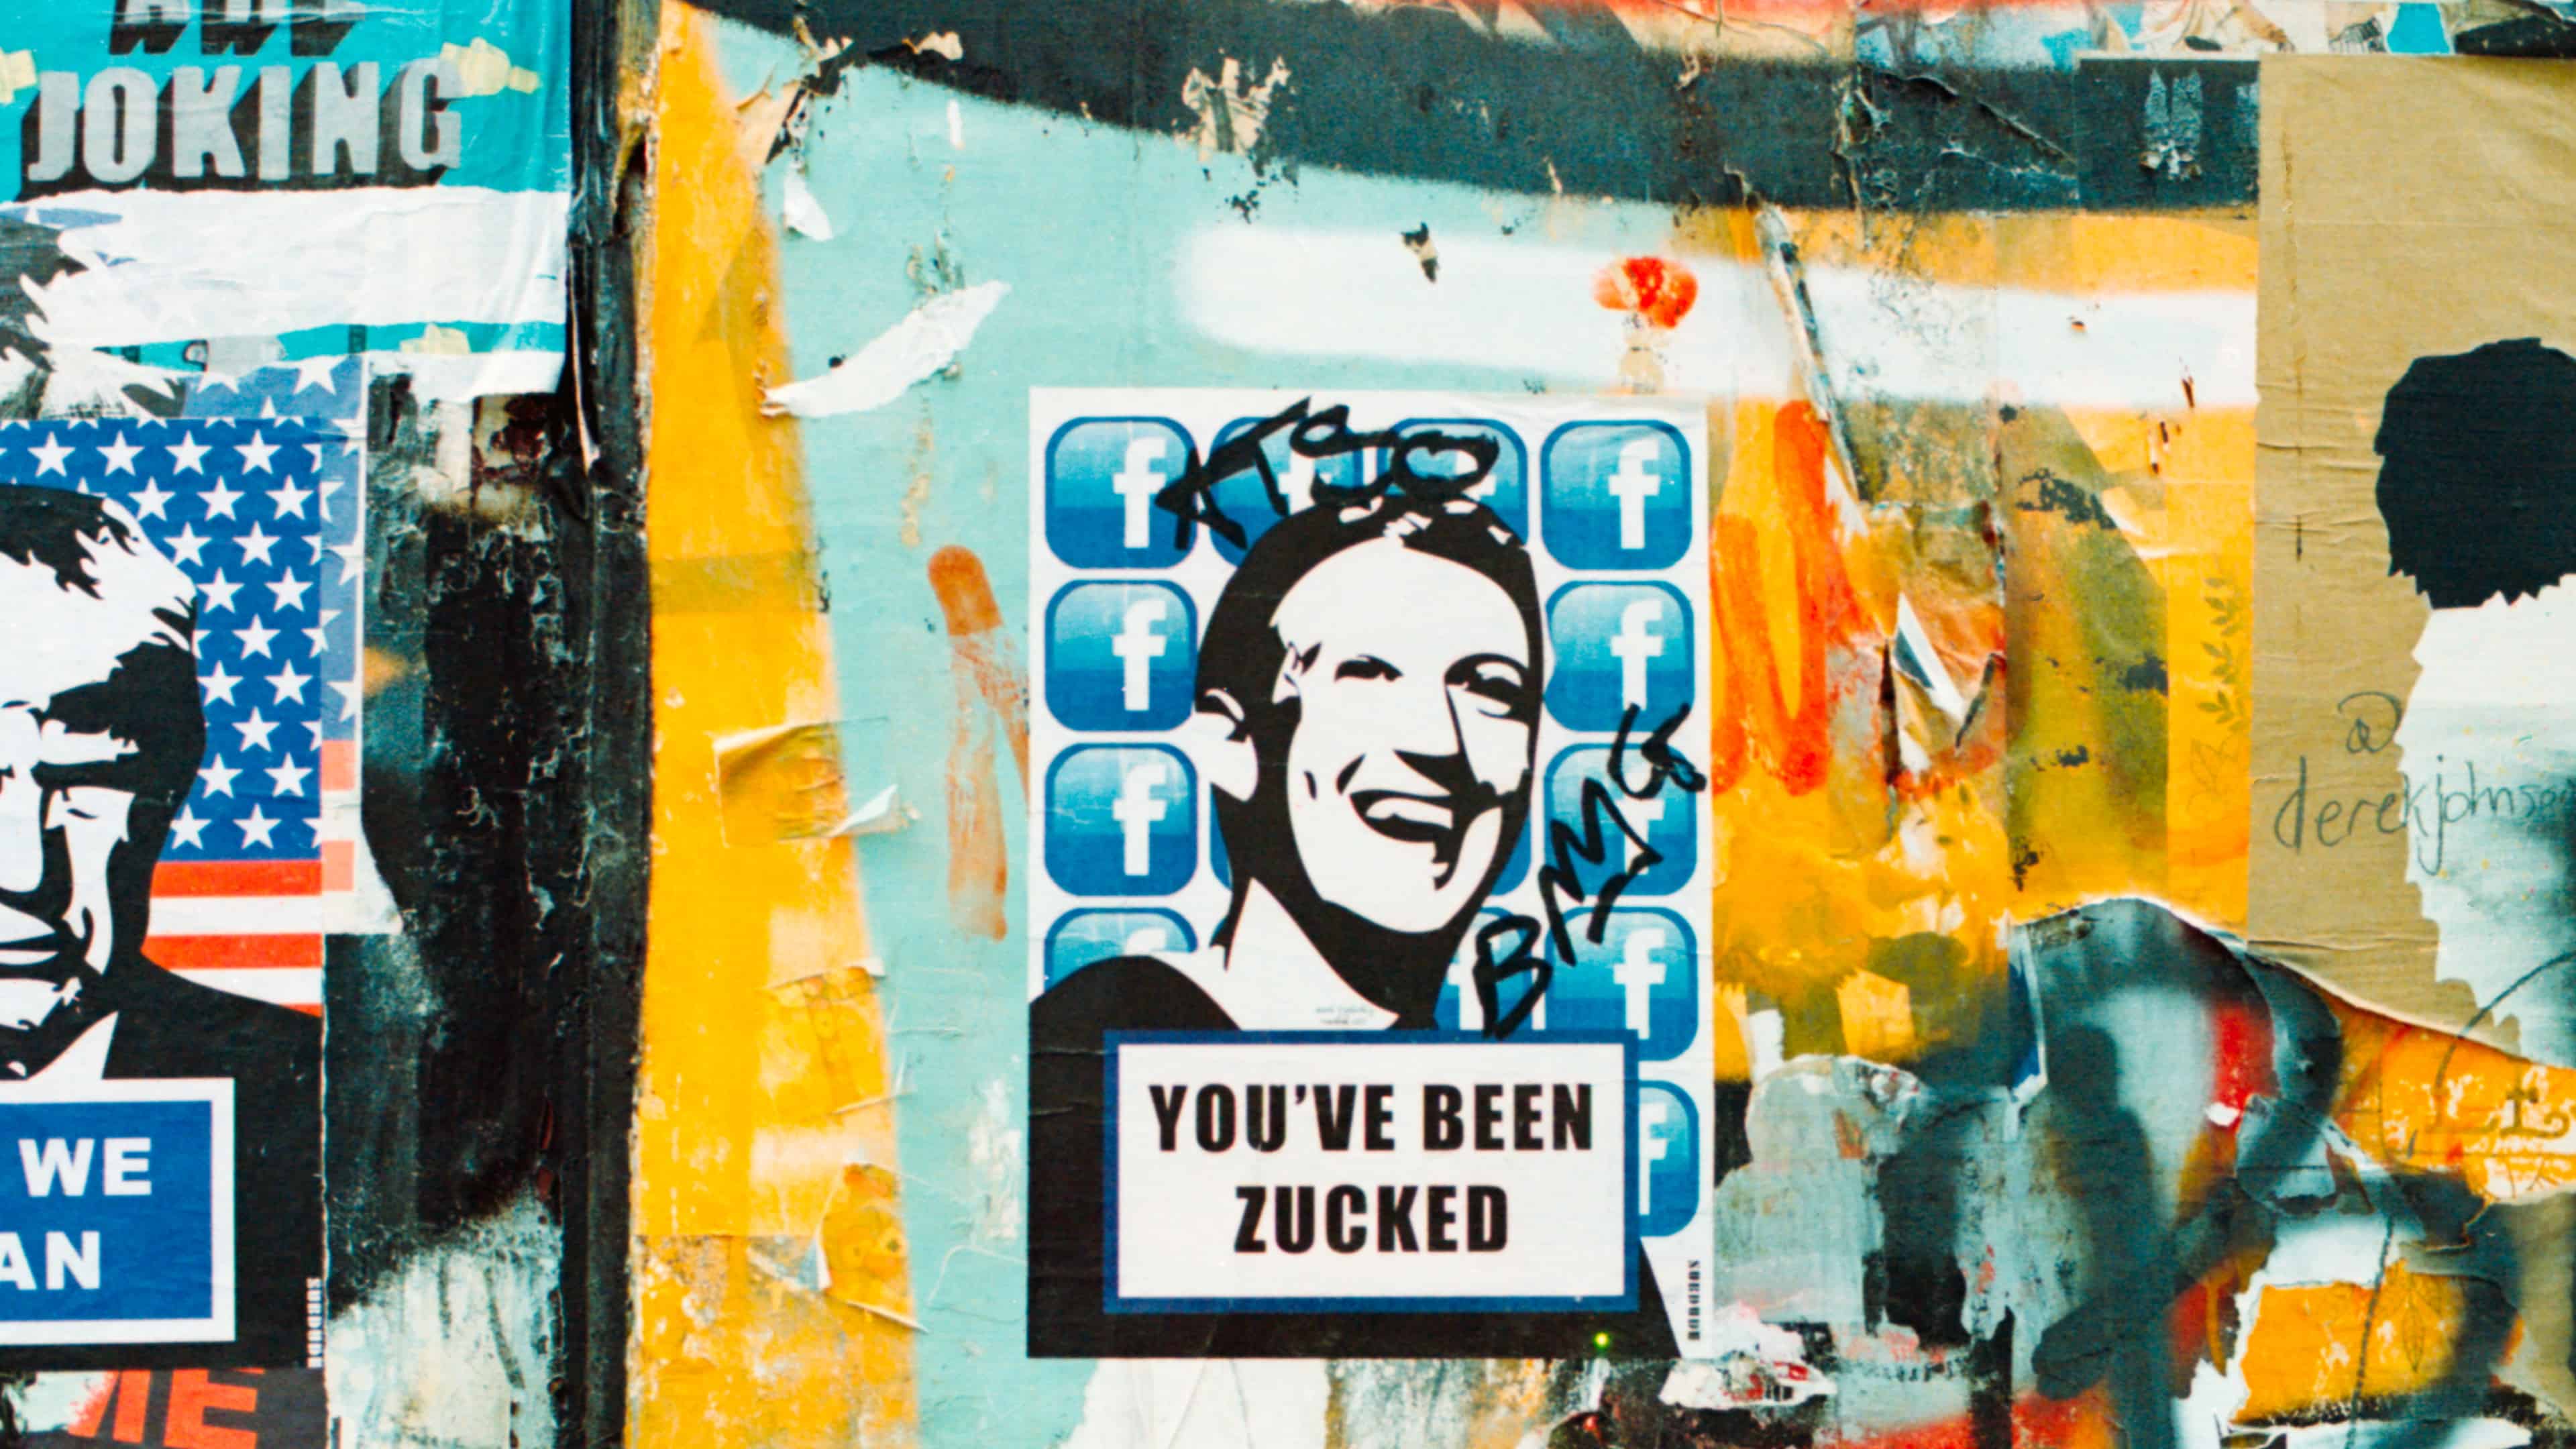 London street art showcasing a bunch of stickers on the side of a building, including one with a Mark Zuckerberg portrait and the tagline "You've been Zucked"